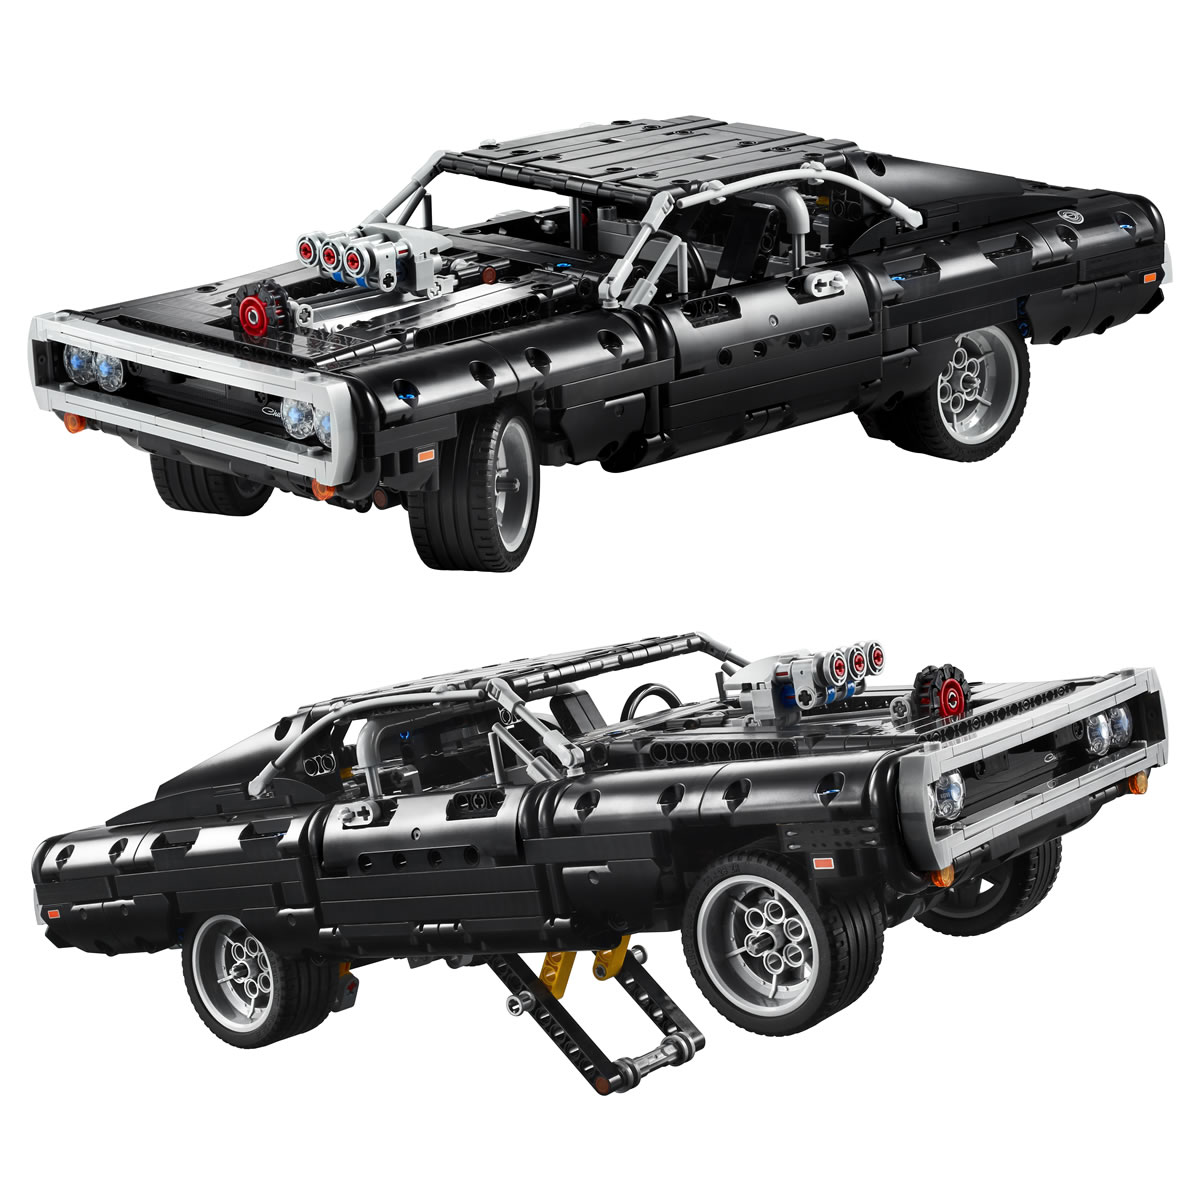 ▻ LEGO Technic Fast & Furious 42111 Dom's Dodge Charger : Tout ce